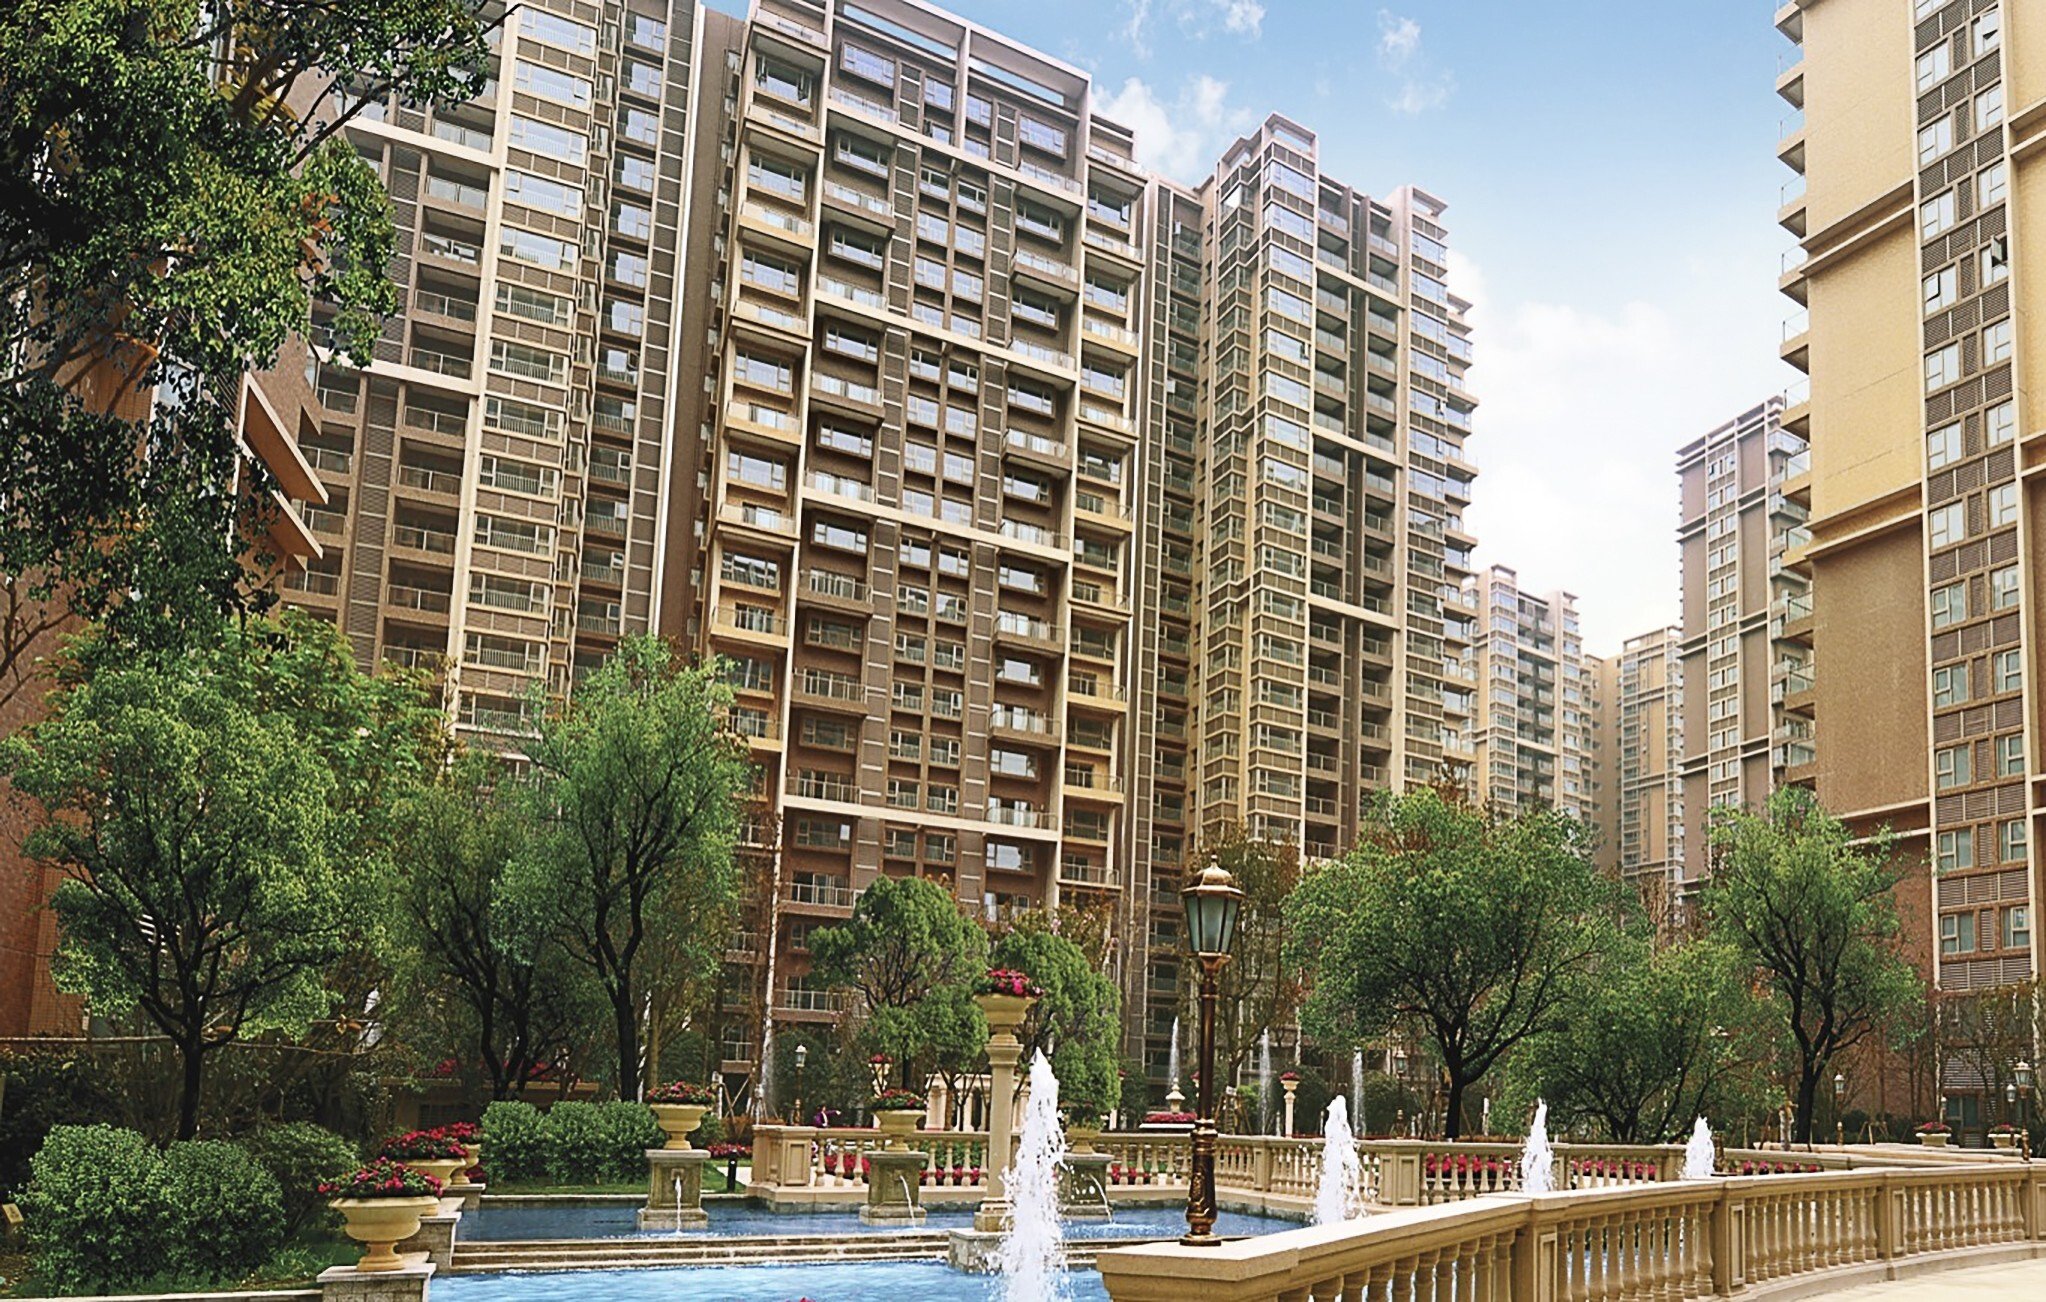 Chengdu Le Parc is a mixed residential and commercial project in the capital of Sichuan province. Photo: Handout